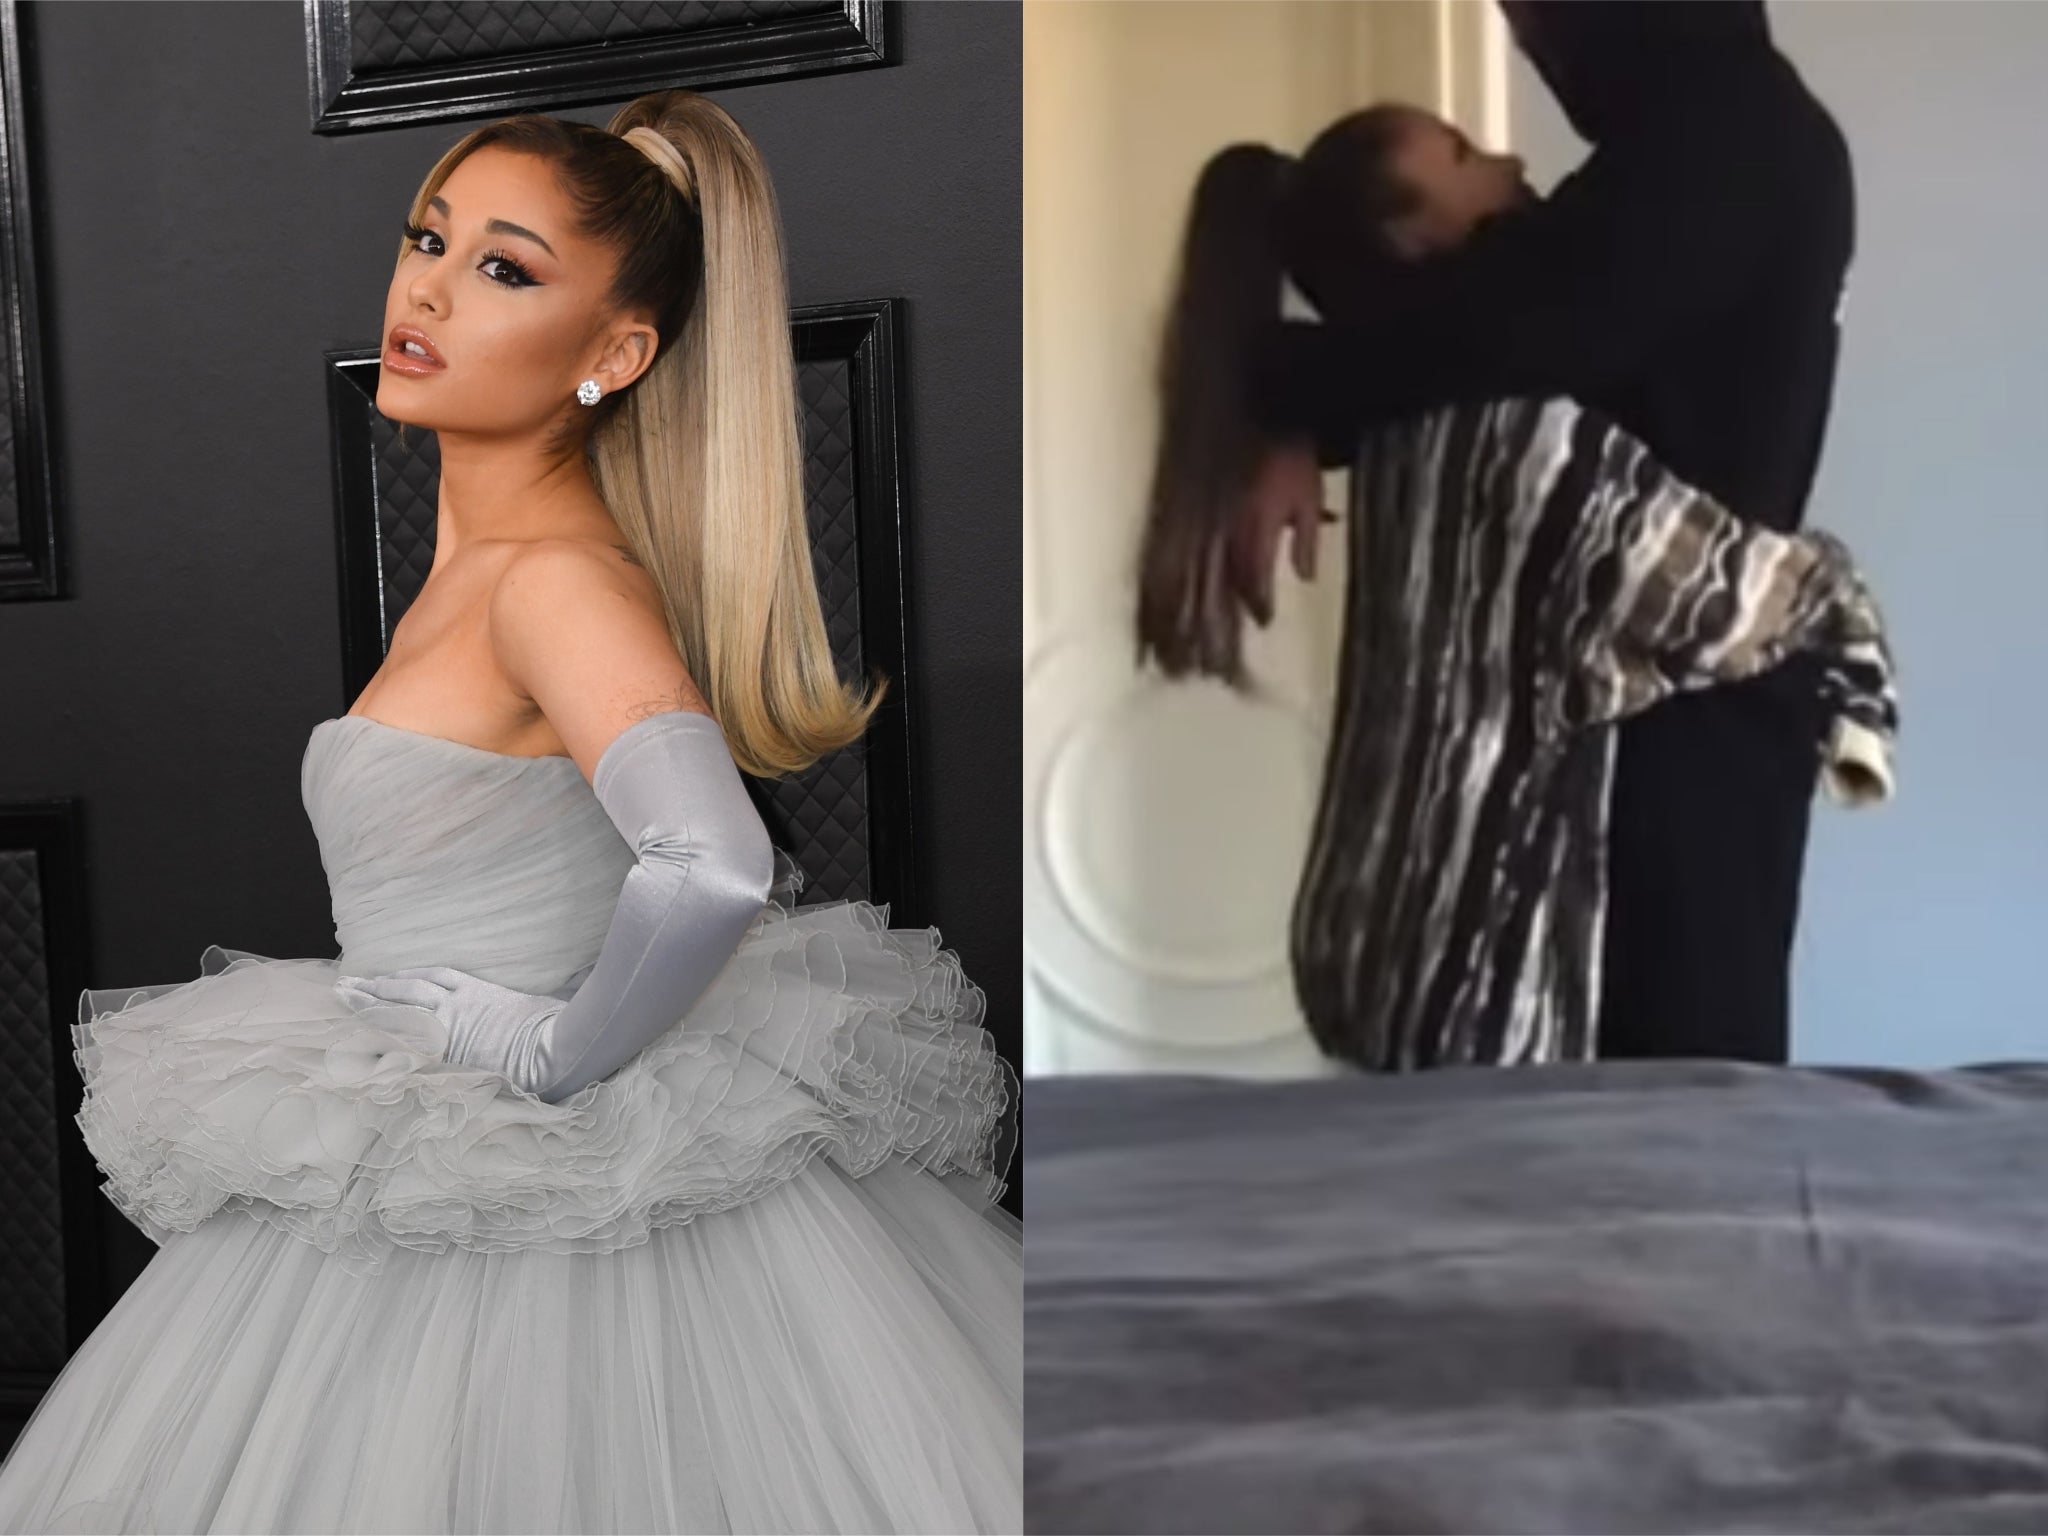 Ariana Grande CONFIRMS Relationship In 'Stuck With U' Music Video